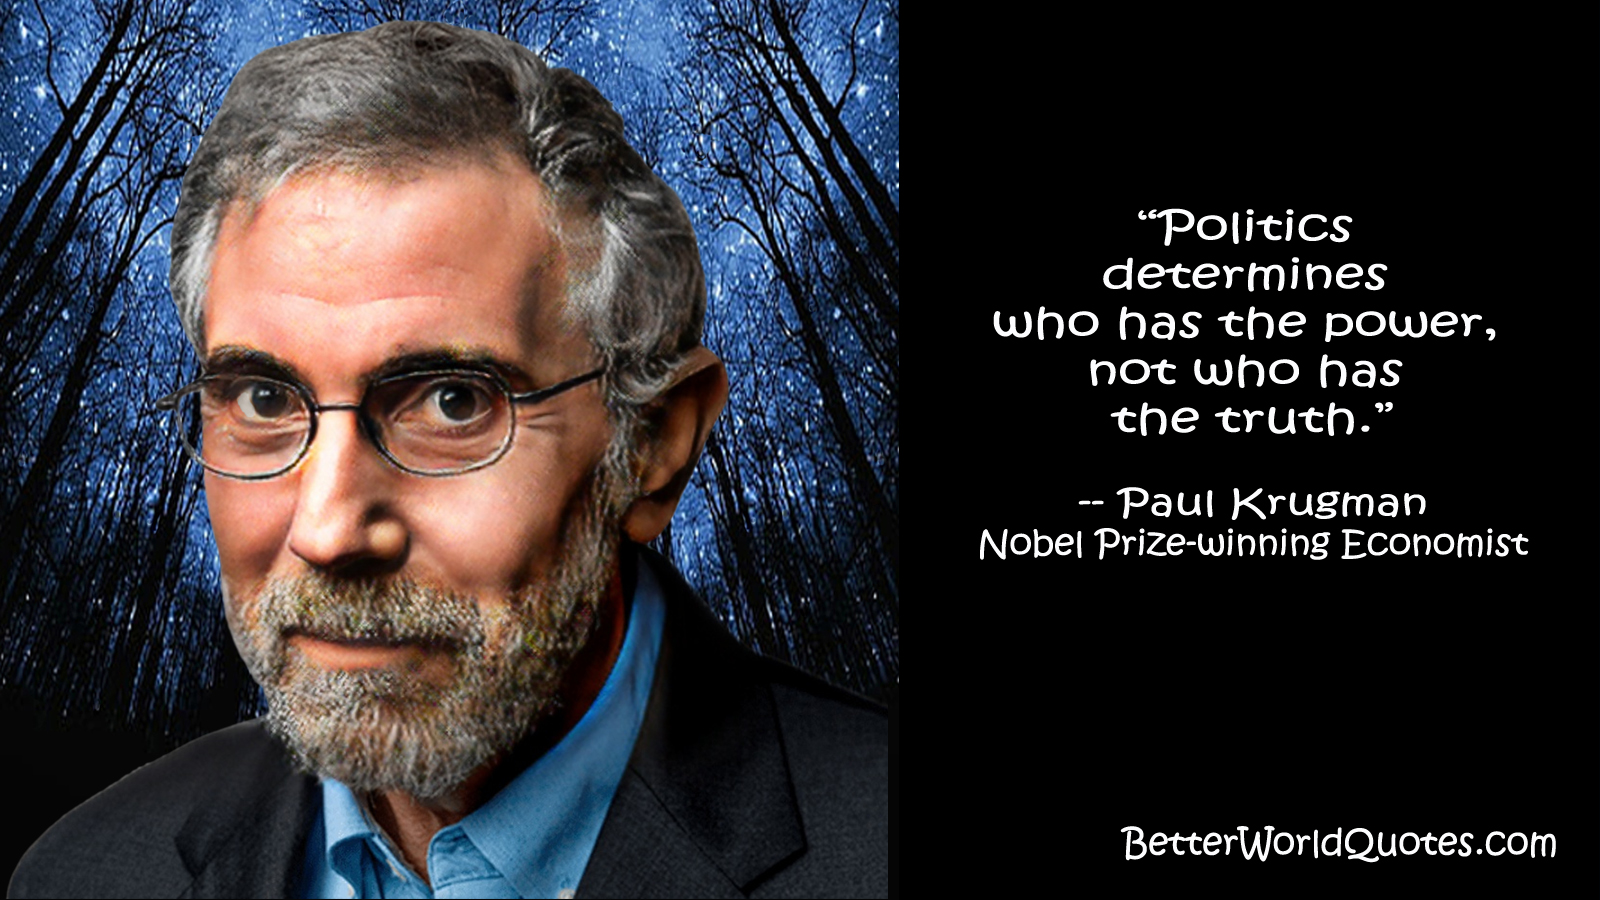 Paul Krugman: Politics determines who has the power, not who has the truth.